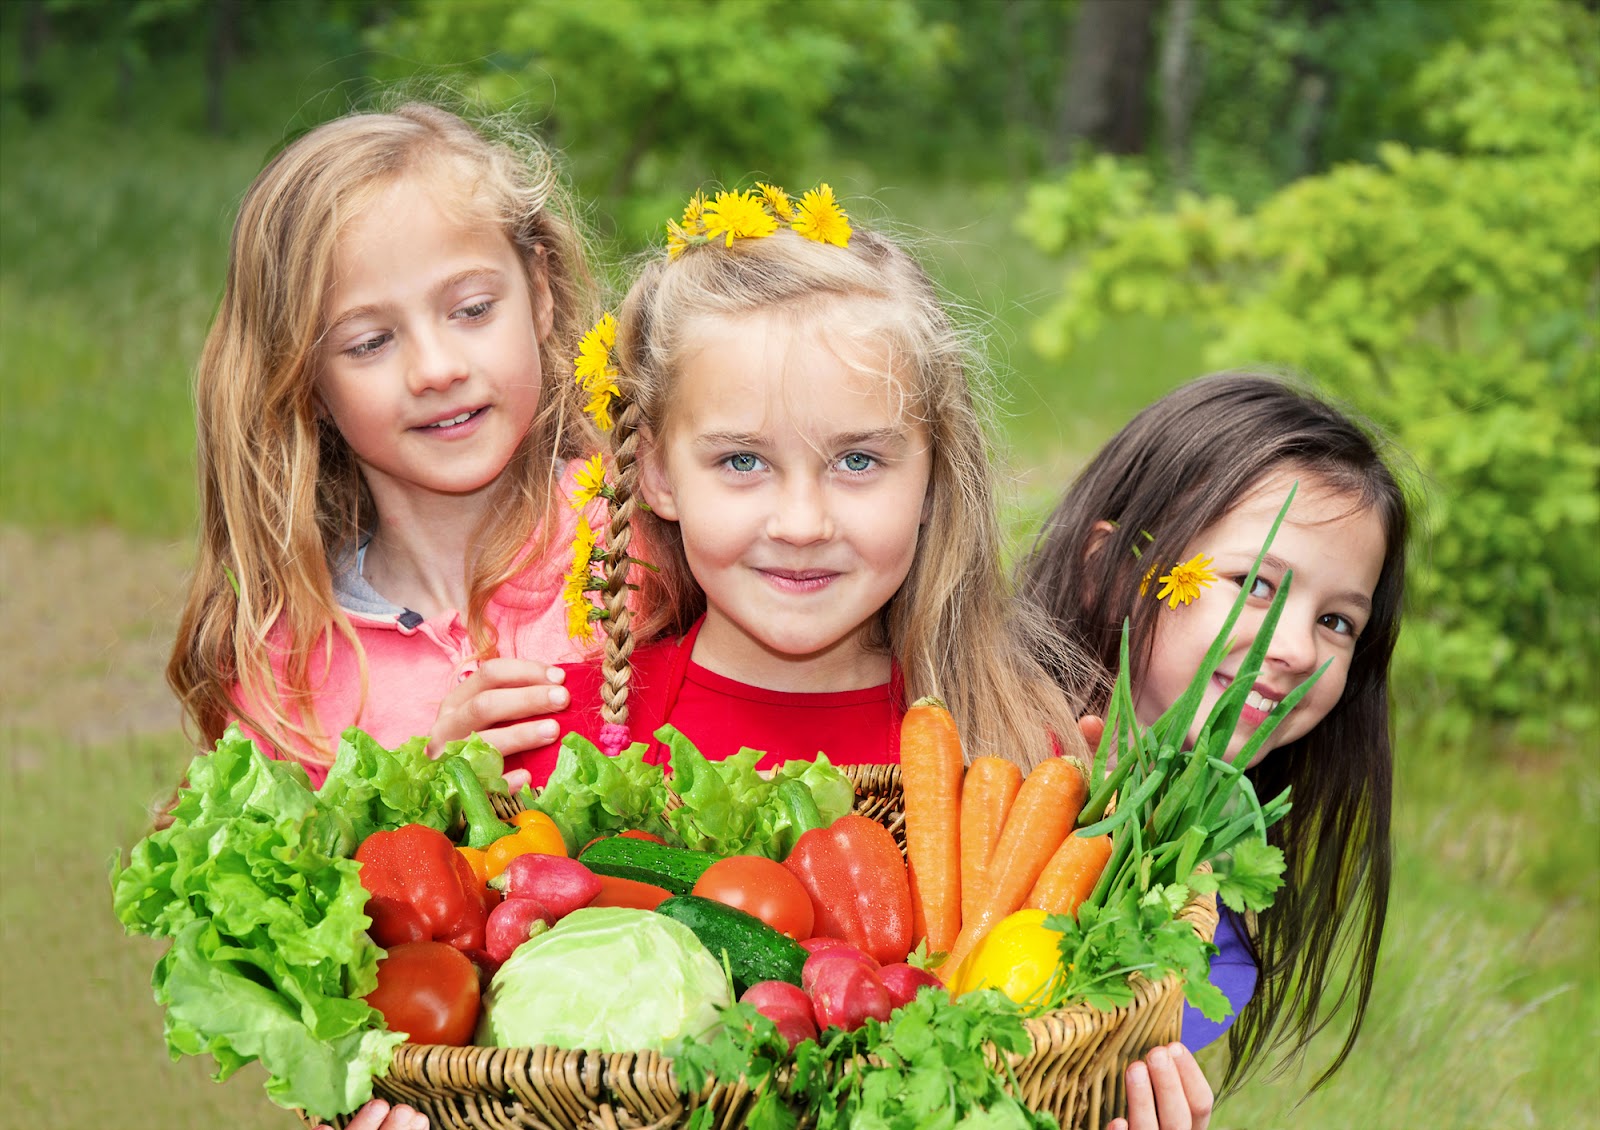 Three children smile as they hold a basket of vegetables.